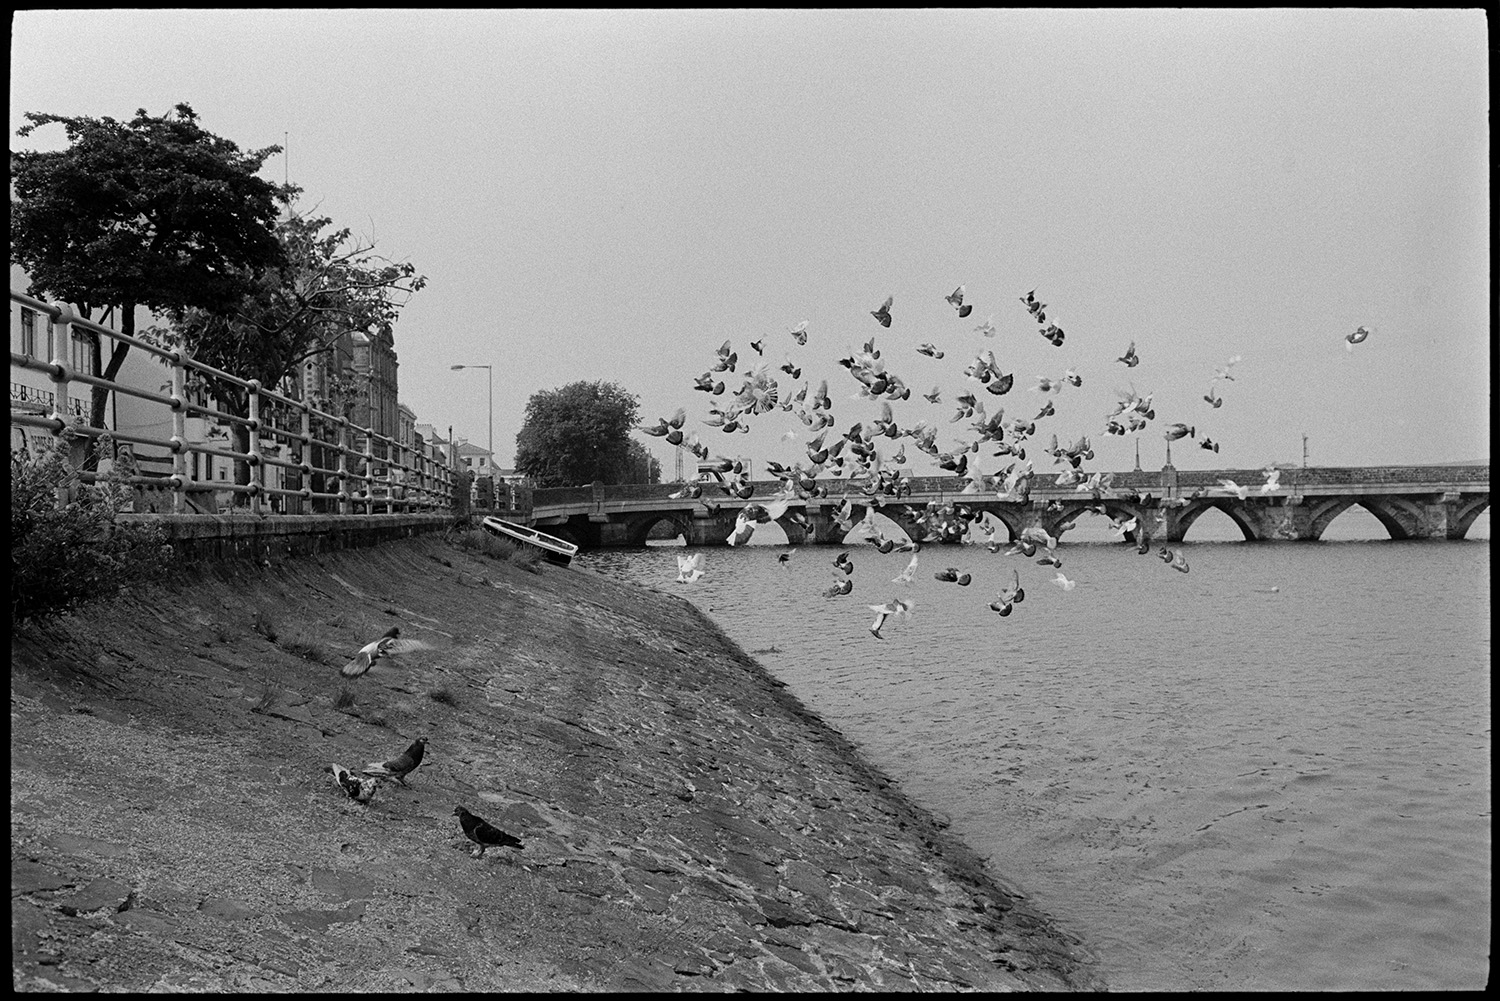 Flock of pigeons beside river, bridge behind. 
[A flock of pigeons on the bank of the River Torridge at Bideford. Bideford Bridge, also known as Bideford Long Bridge can be seen in the background, as well as a rowing boat moored on the river bank.]